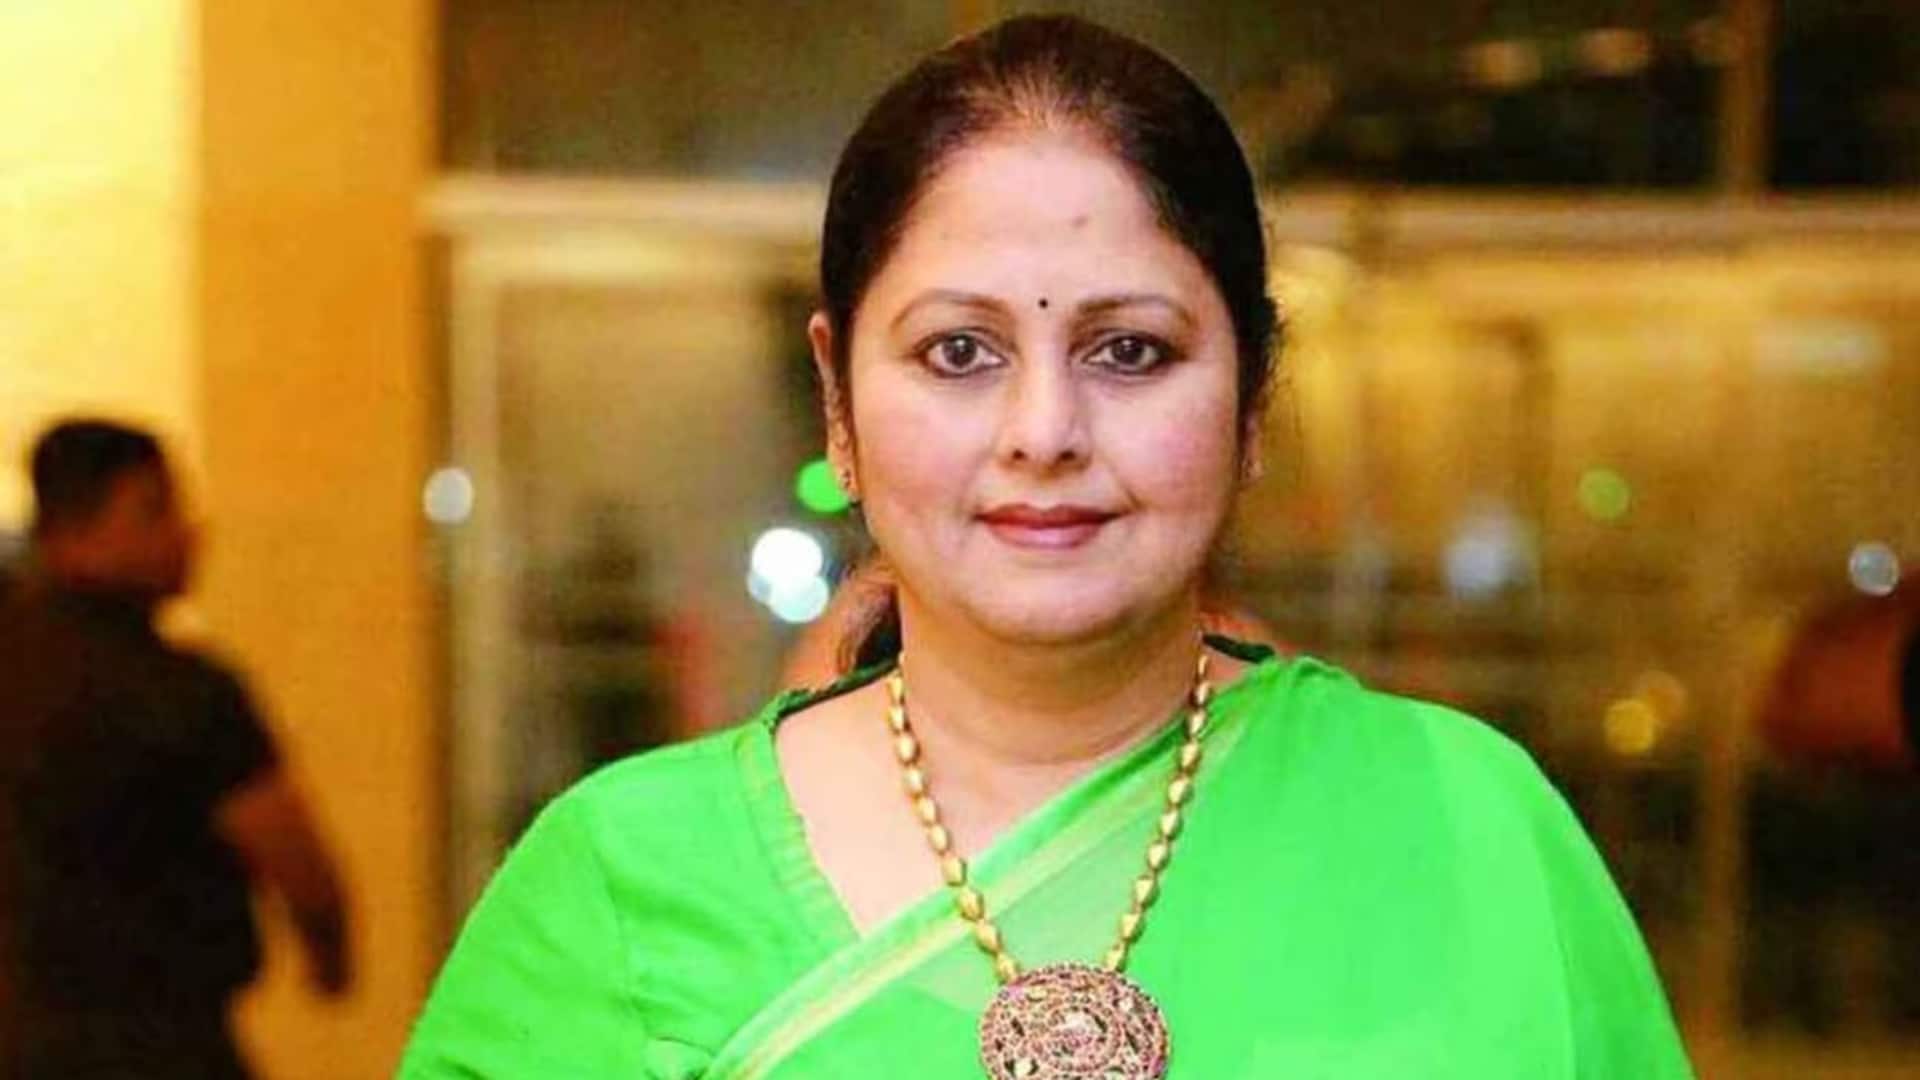 Veteran actor Jayasudha marries for third time: Reports